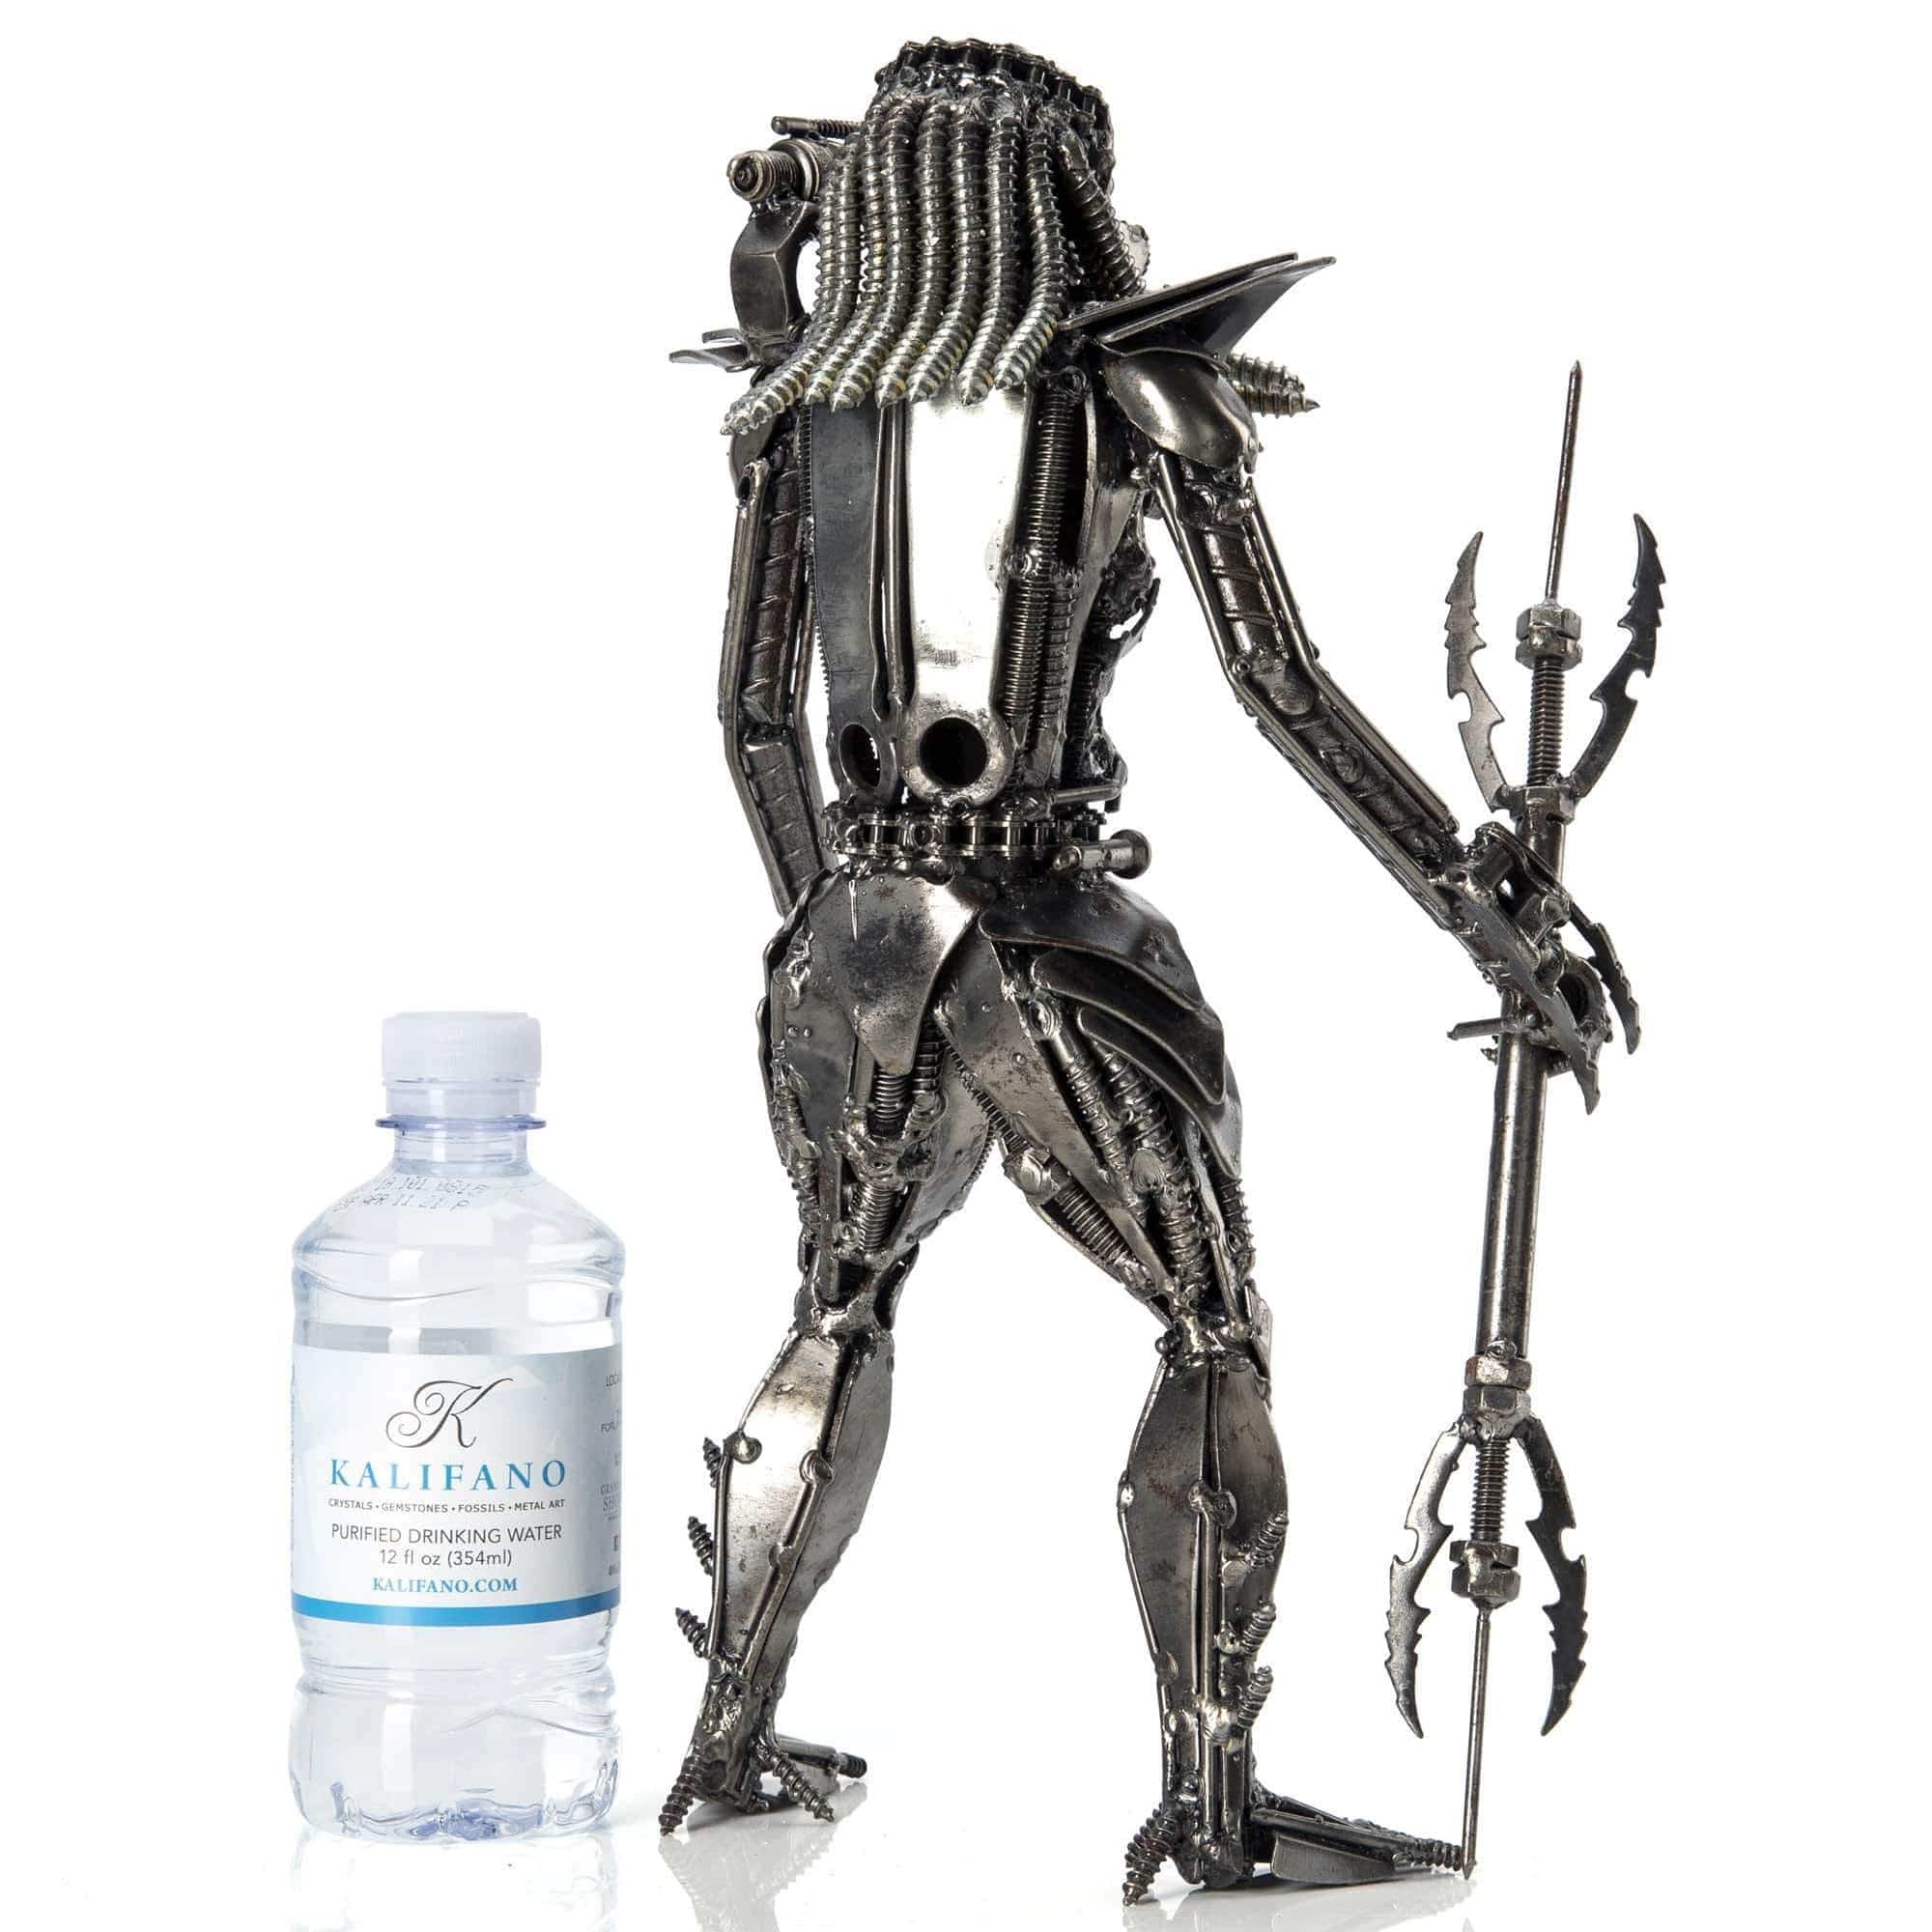 Kalifano Recycled Metal Art Predator Muscle Inspired Recycled Metal Sculpture RMS-1400PM-N